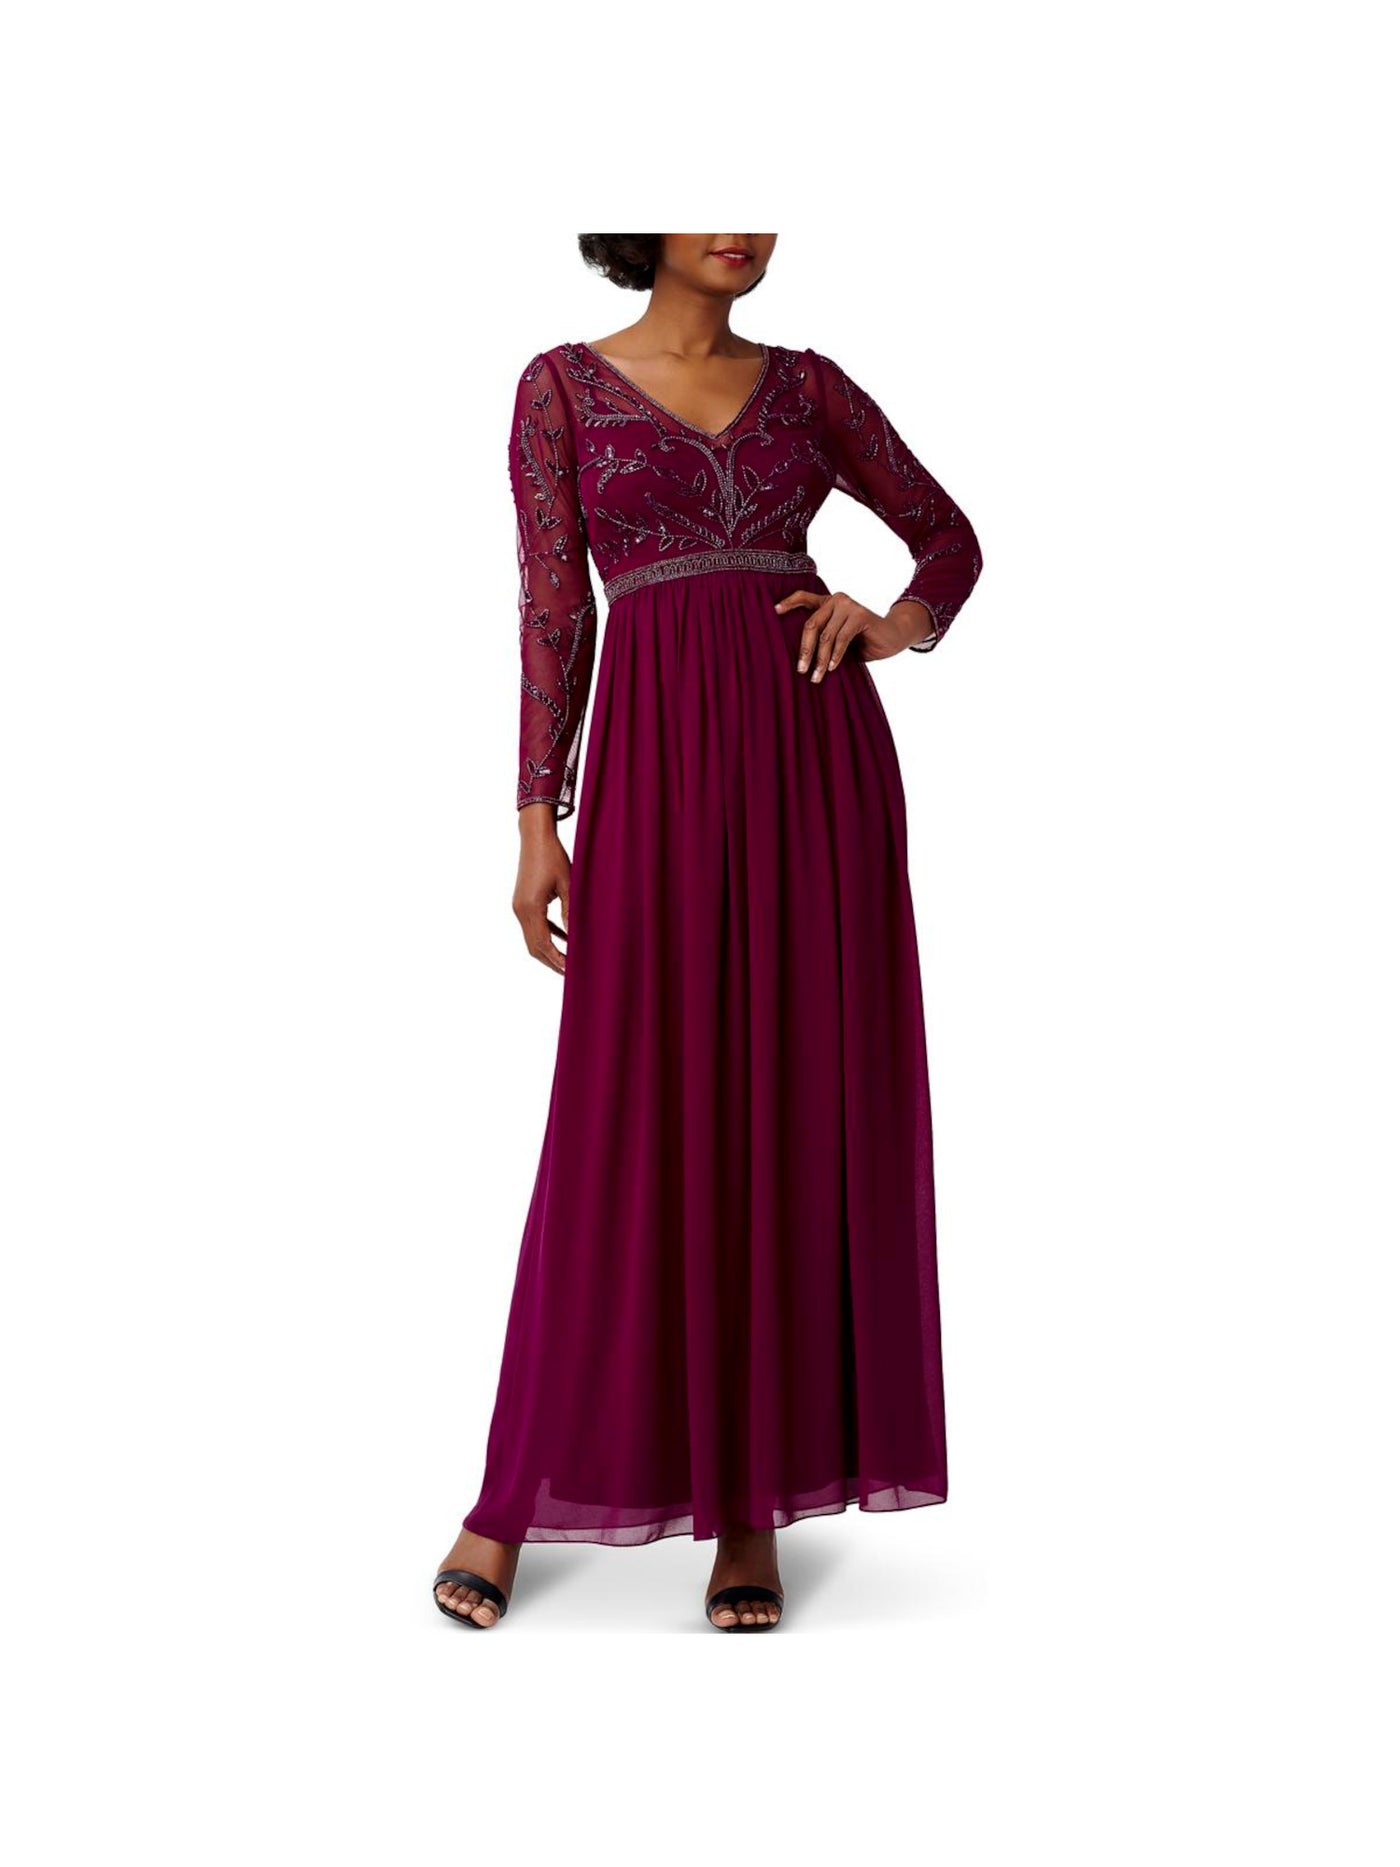 ADRIANNA PAPELL Womens Burgundy Zippered Lined Beaded Bodice Long Sleeve V Neck Maxi Formal Gown Dress 6